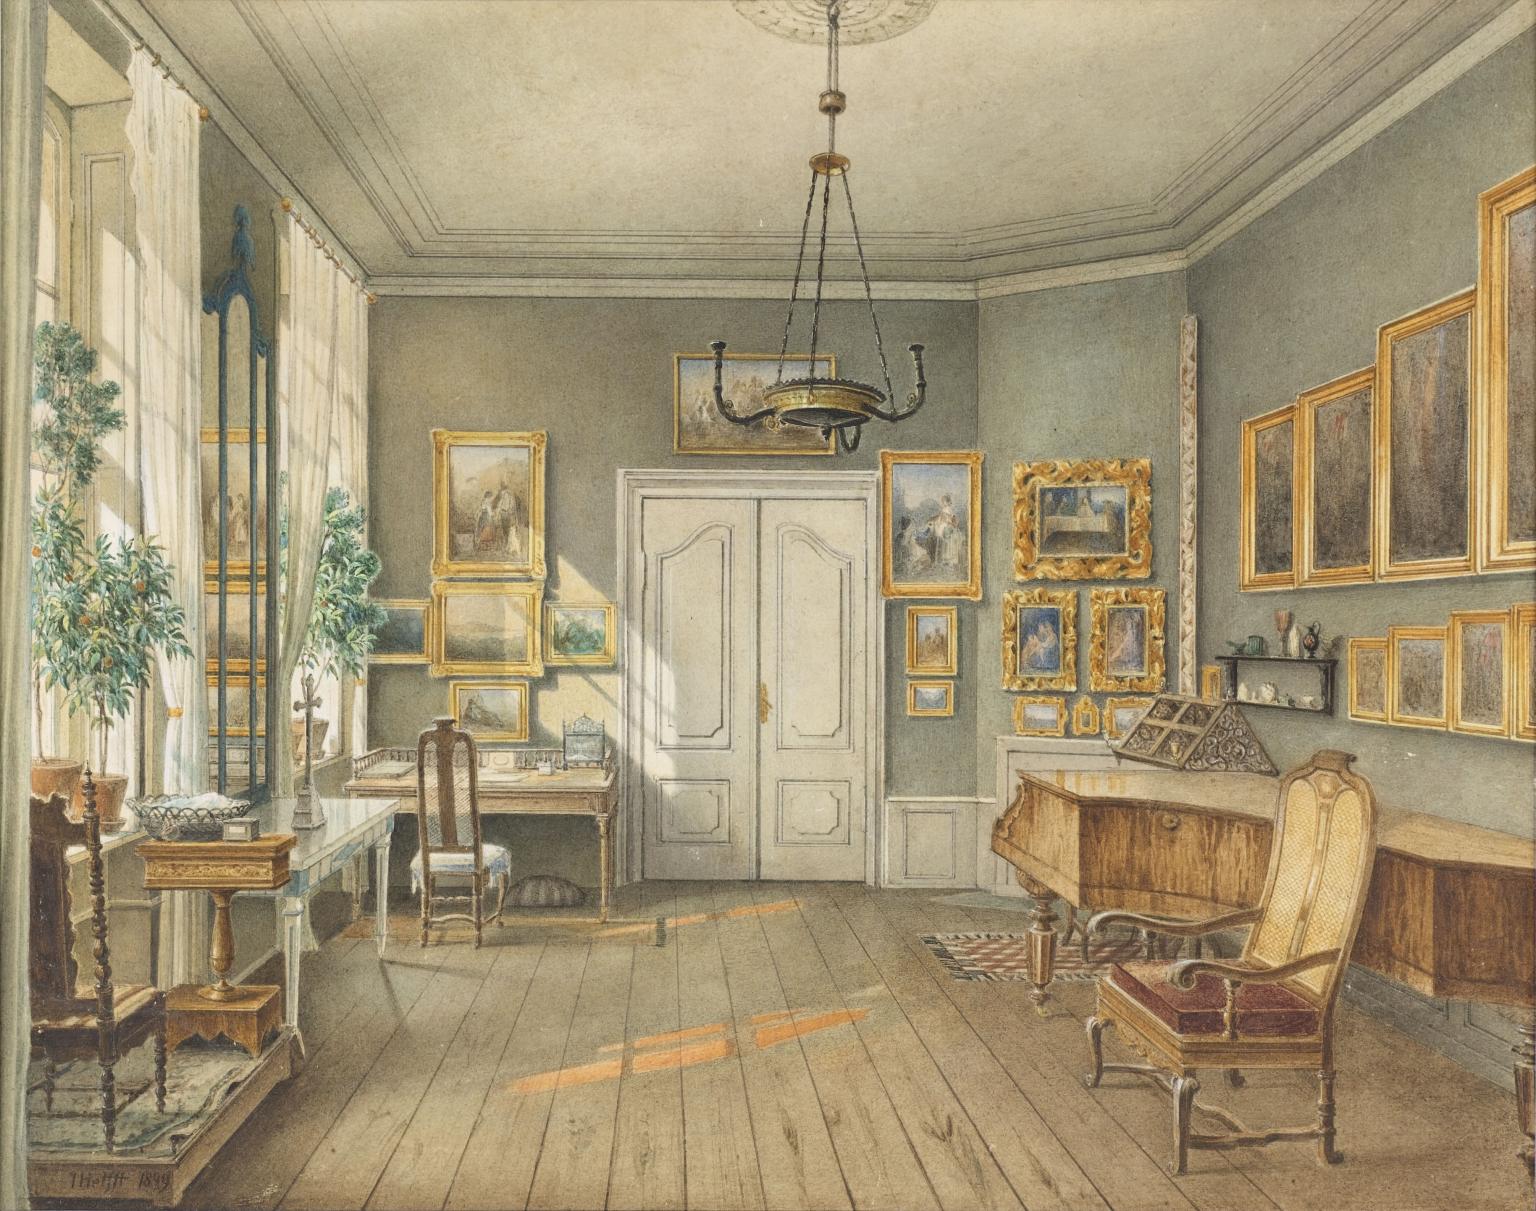 Painting of room featuring natural light, grand piano, and walls filled with pictures in gold frames.